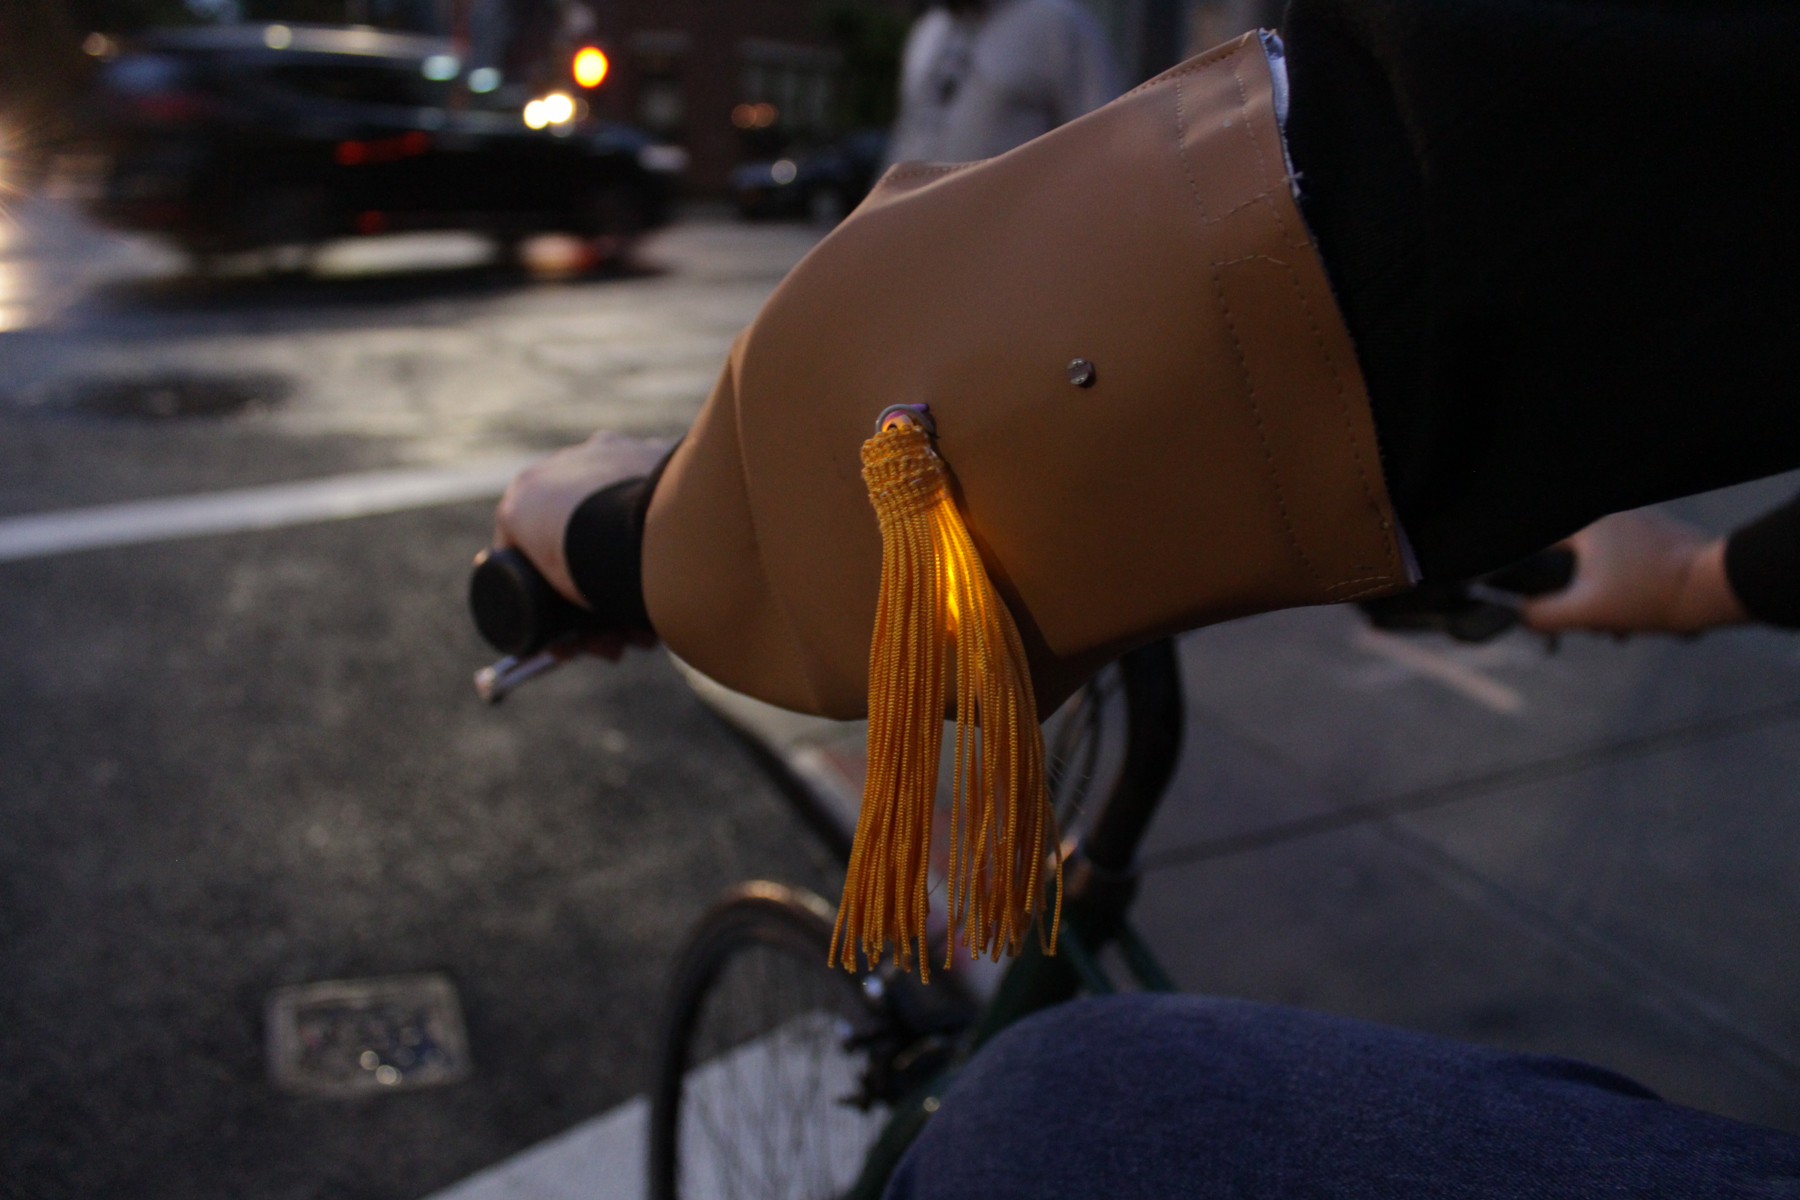 Photo of the wearable device being used. The fringe is light up as response to the sunset.